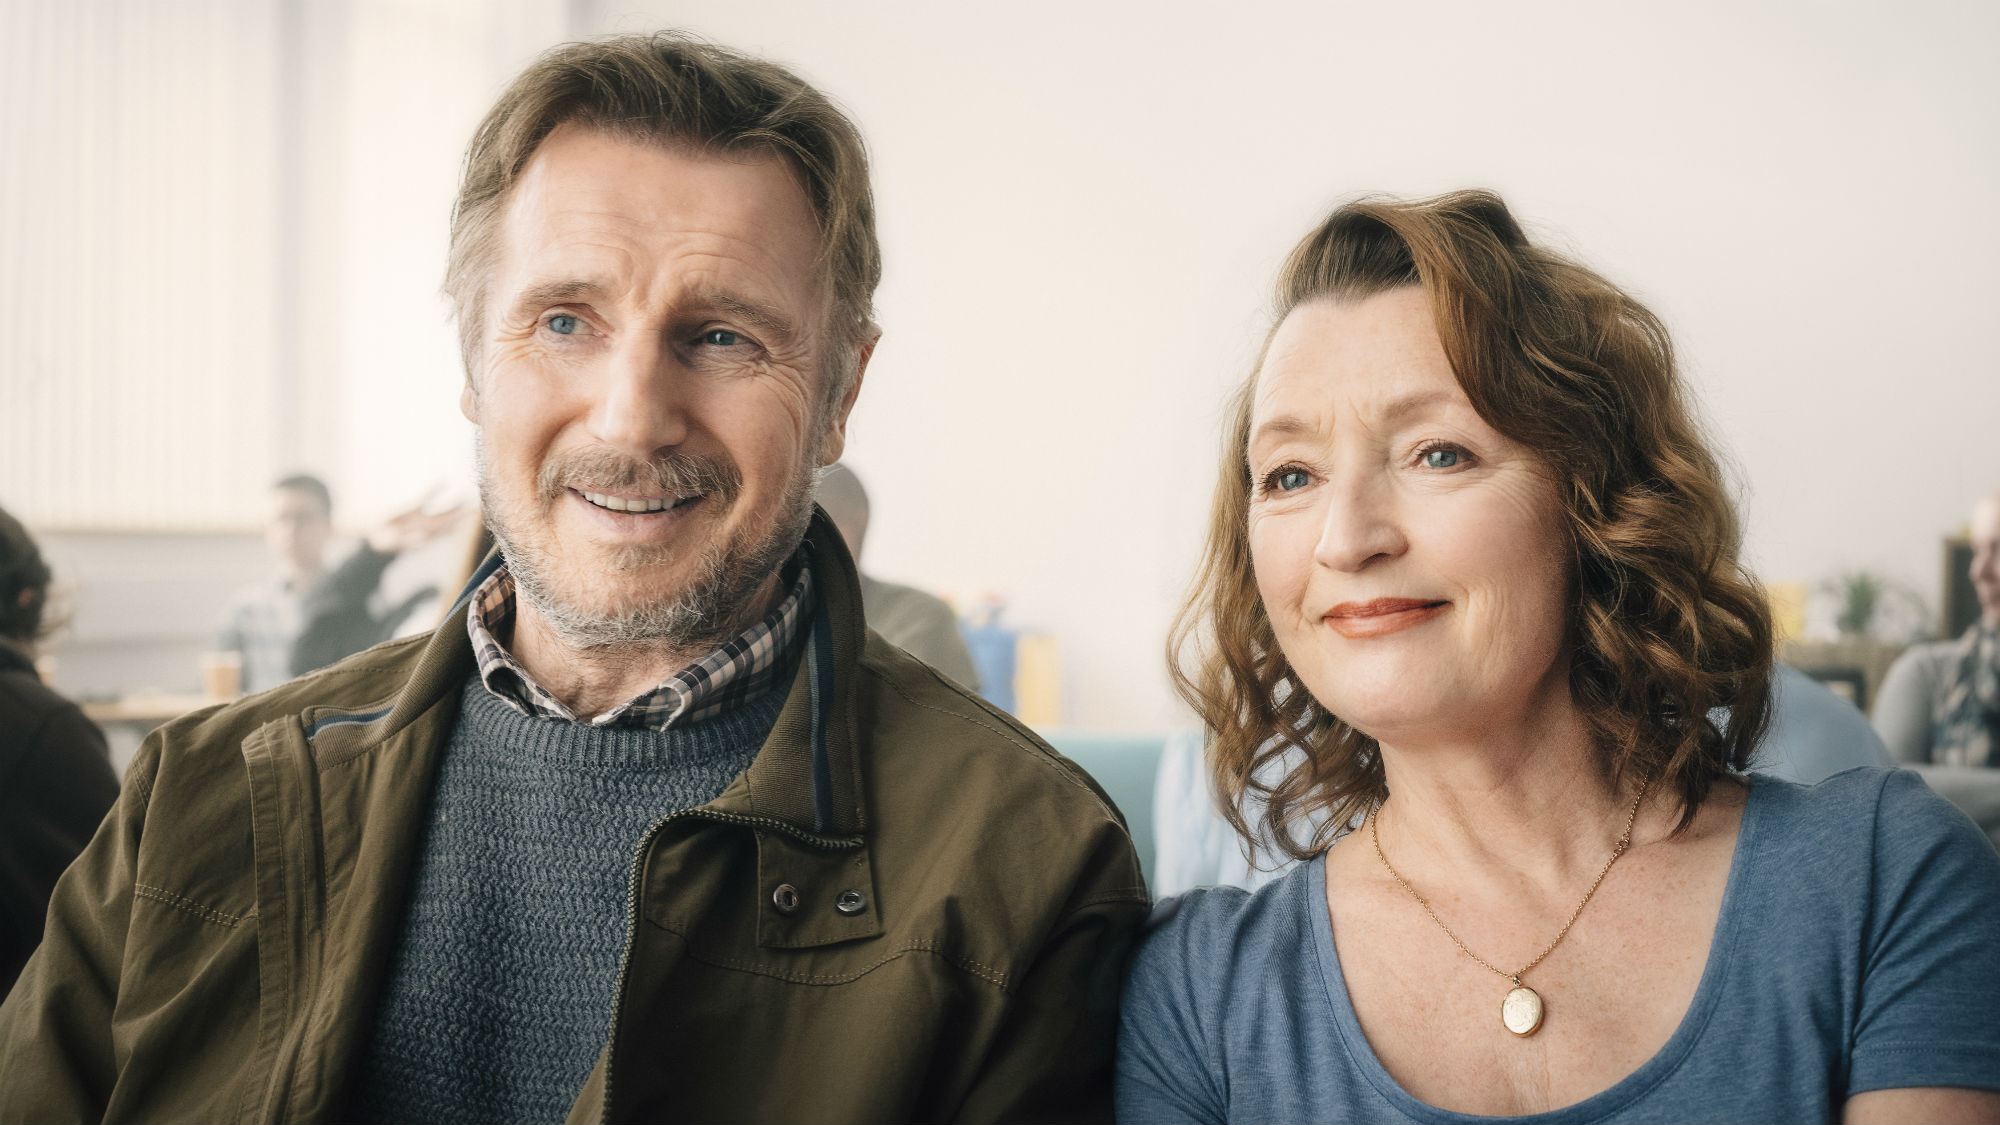 Exclusive Interview: ‘Ordinary Love’ Star Lesley Manville on Working with Liam Neeson, Her Career Boom and Avoiding Twitter